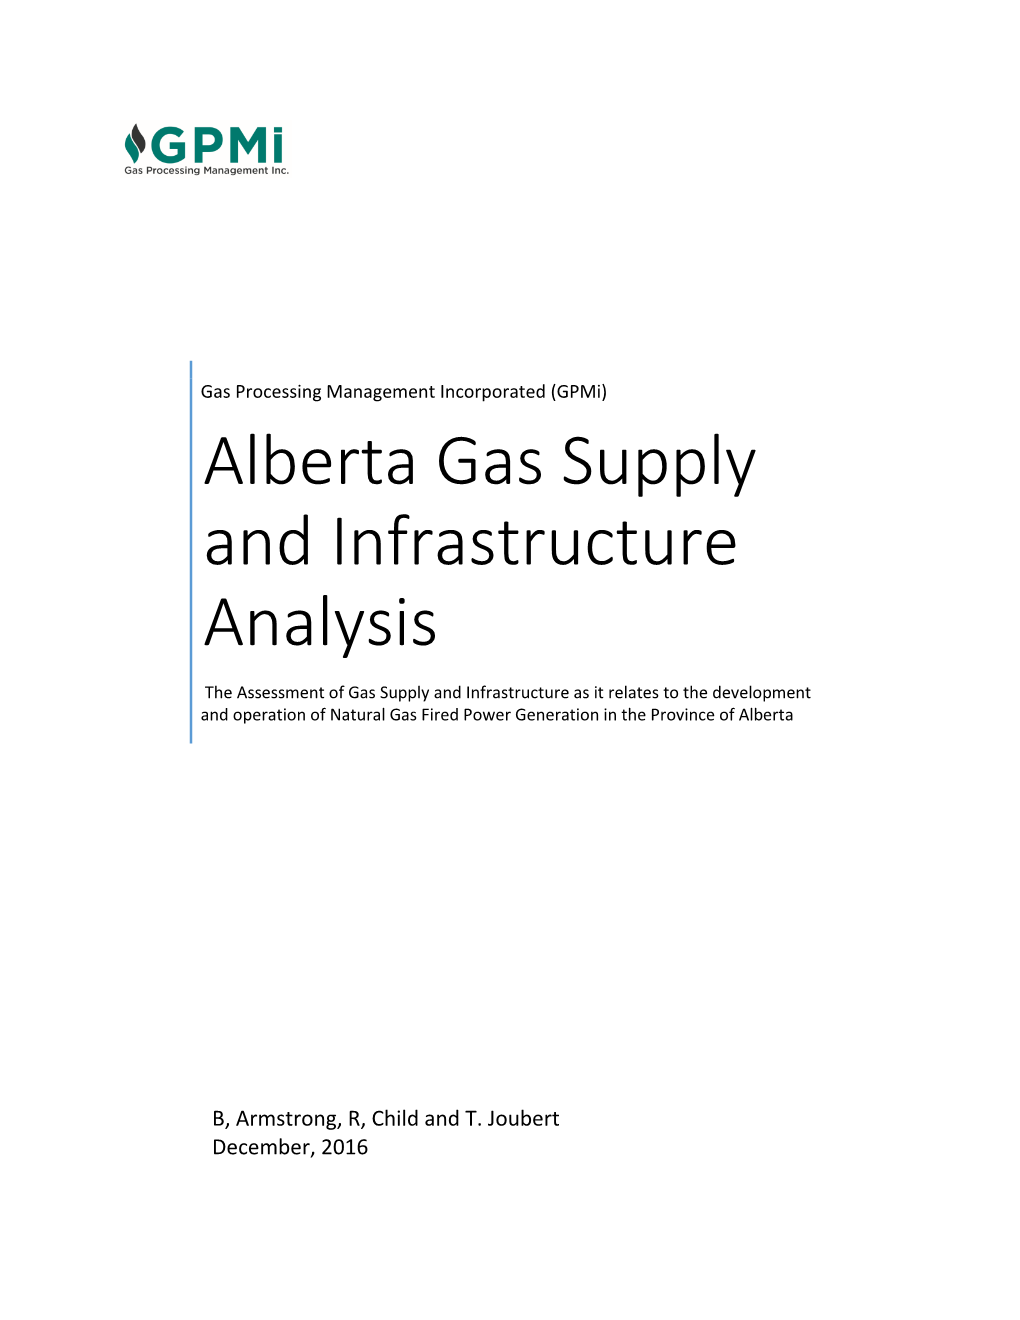 Alberta Gas Supply and Infrastructure Analysis